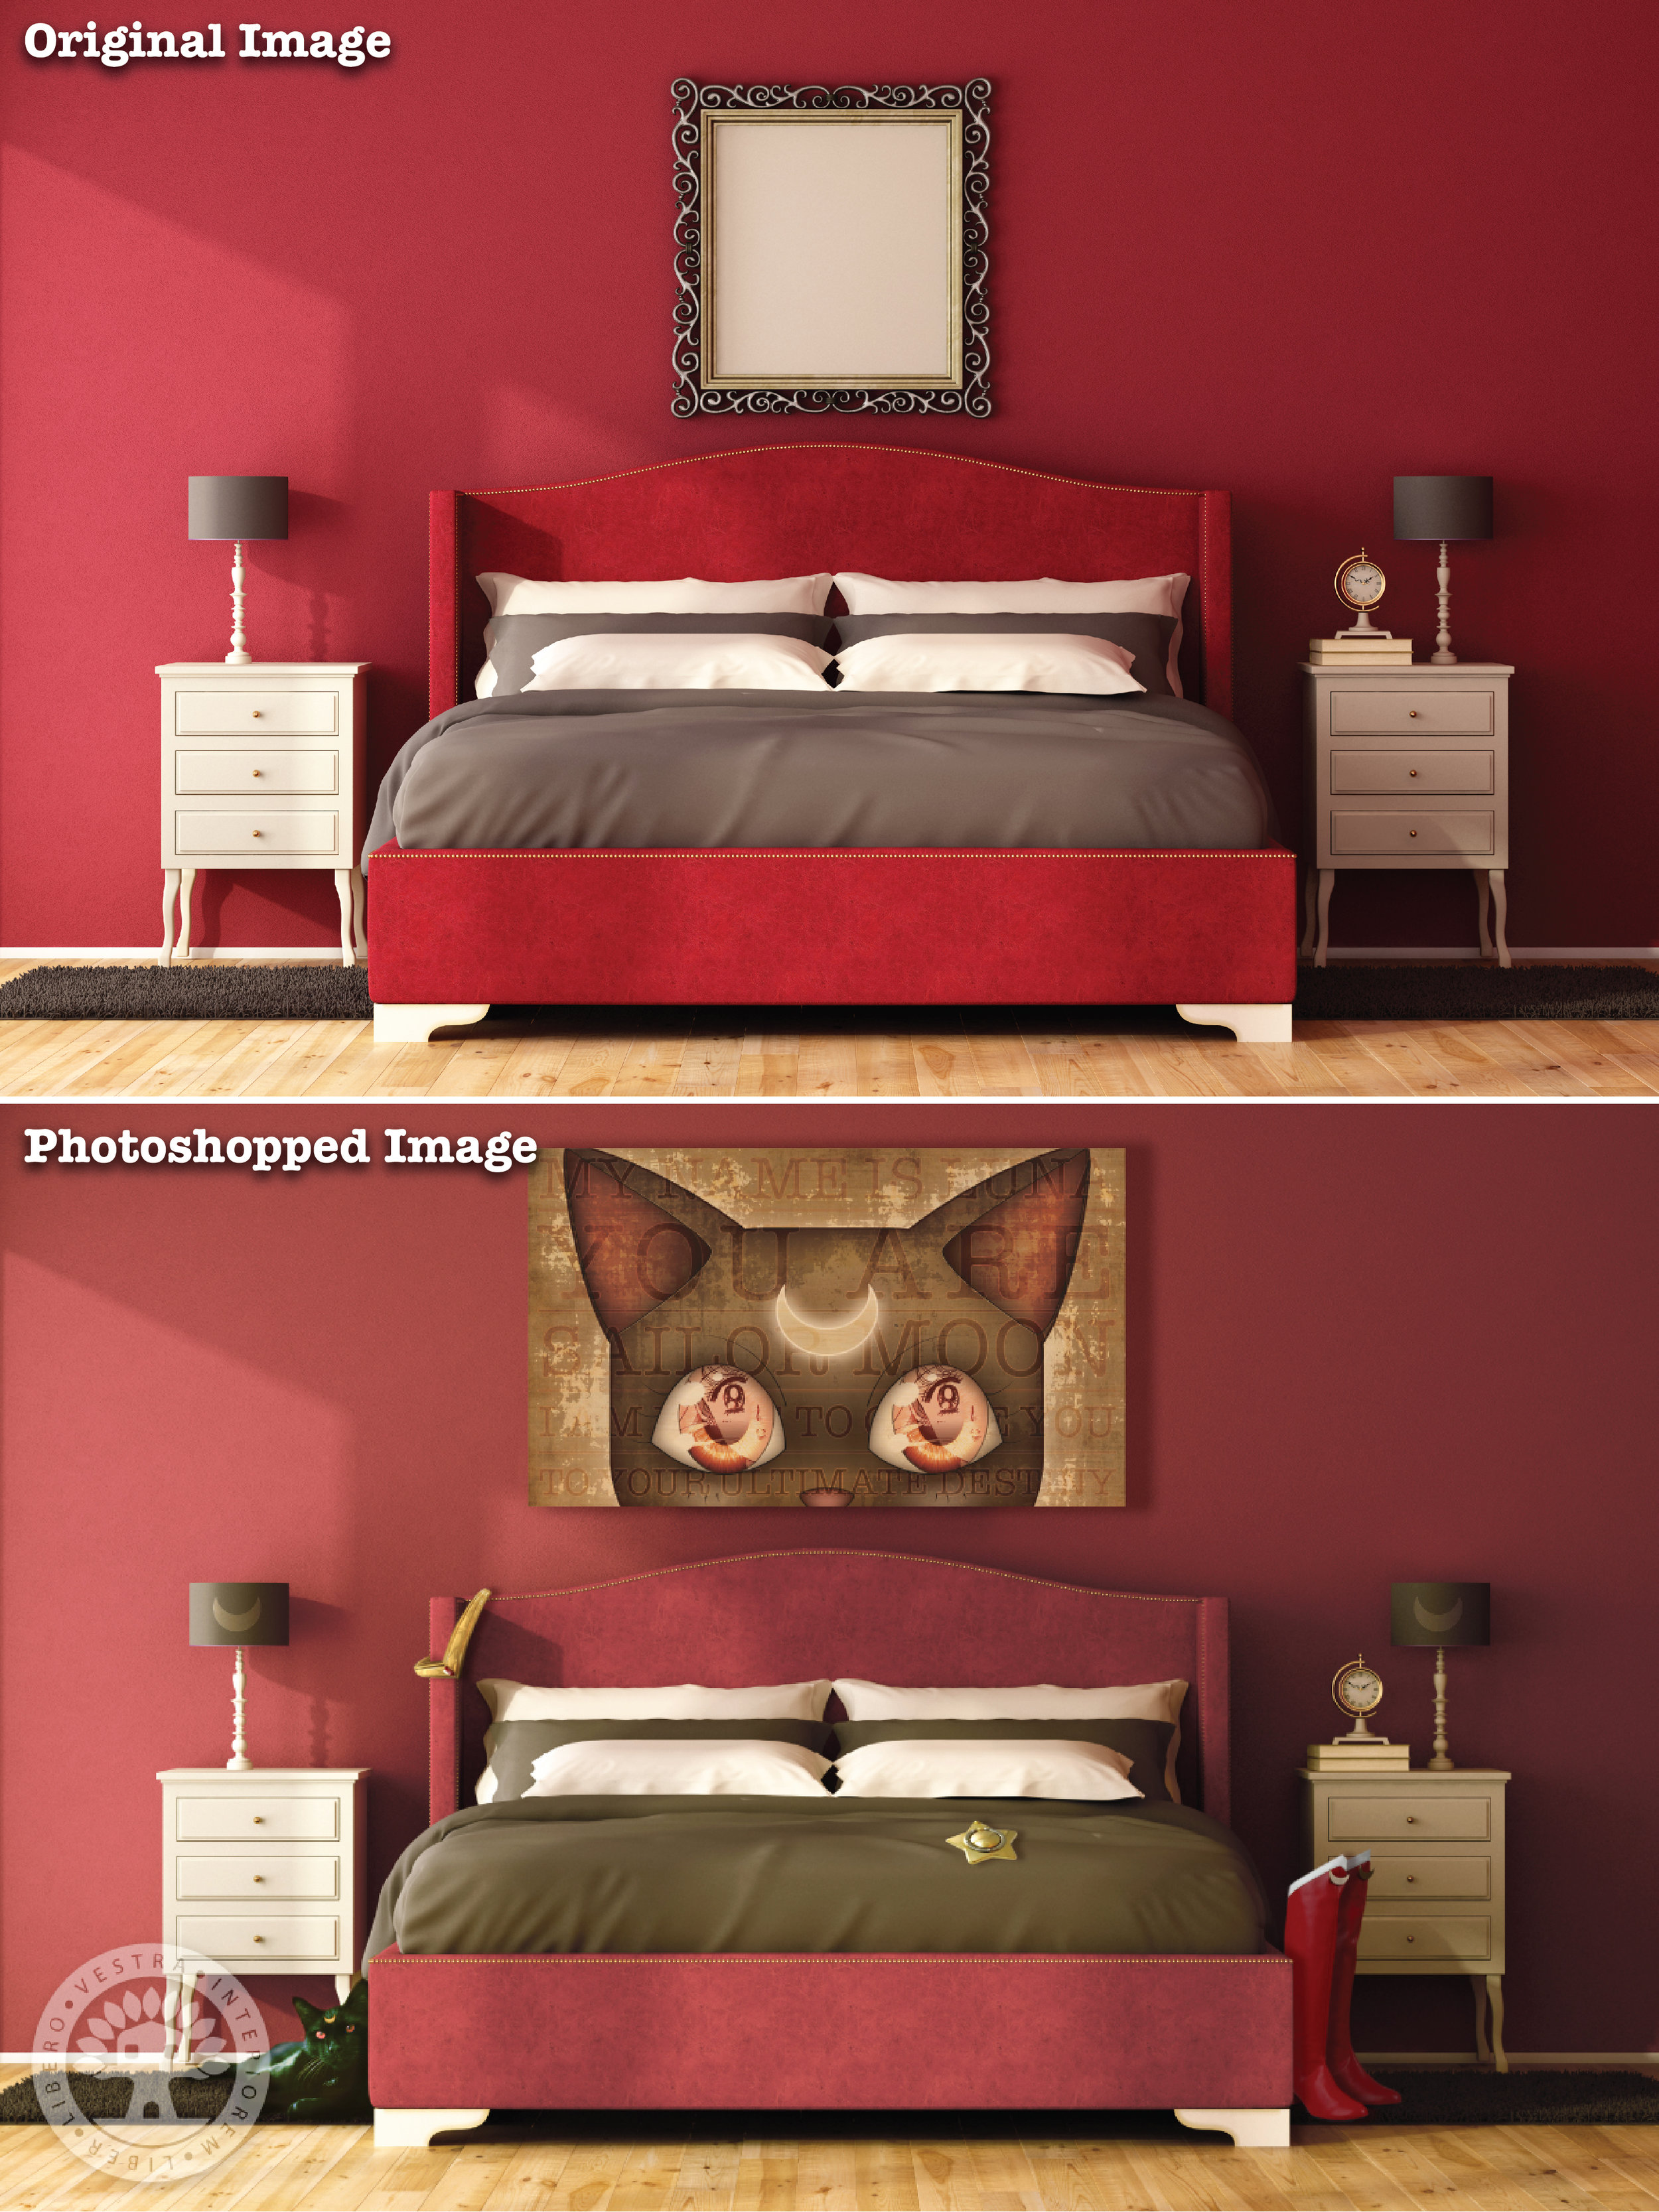 "Usagi's Room" before and after Photoshop . ~ Corinne Jade, ClubHouse Collective